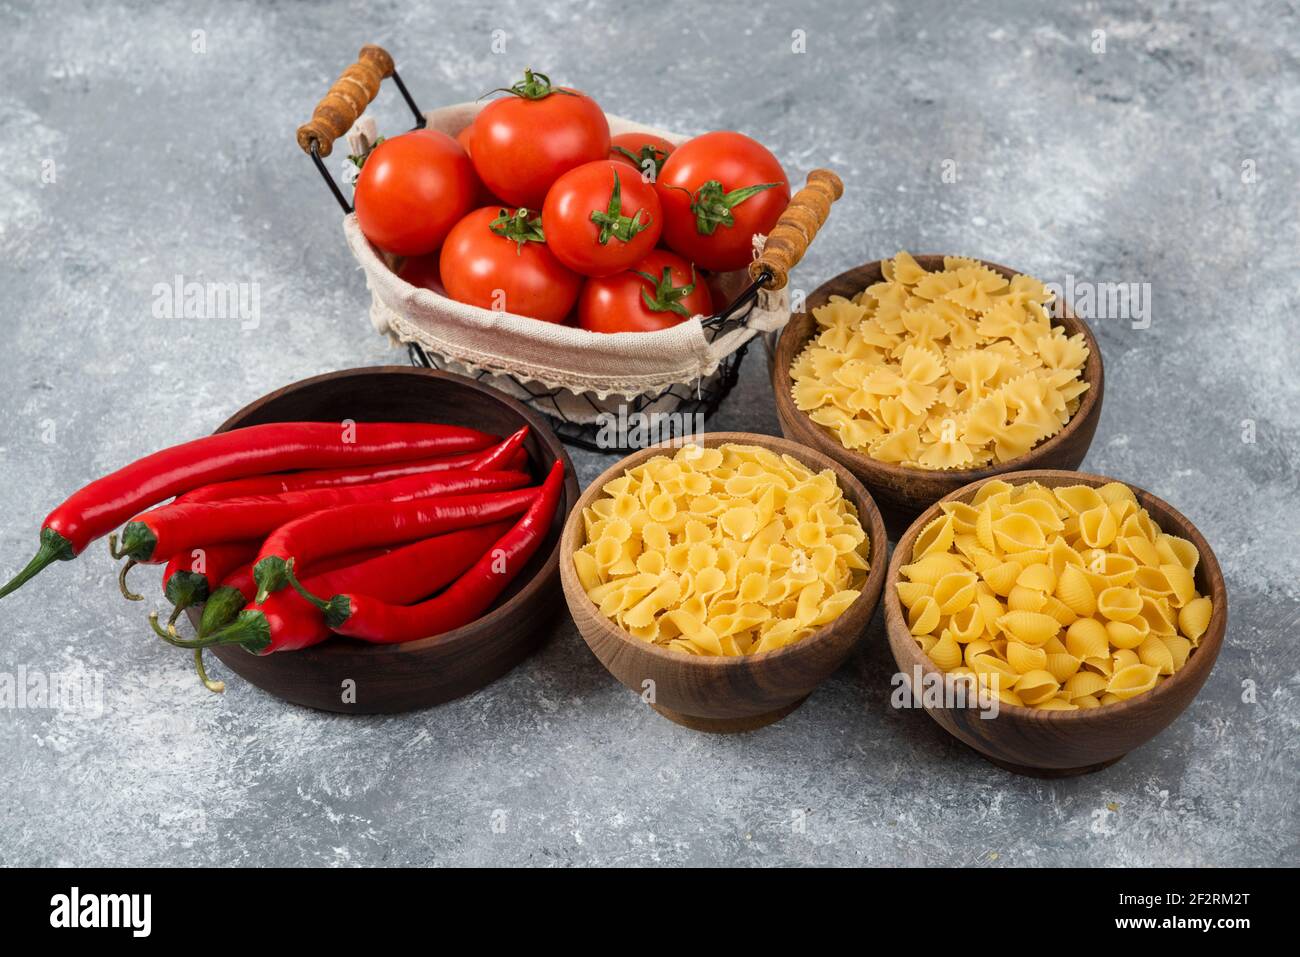 Wooden bowls of raw pasta with red chili peppers and tomatoes Stock Photo